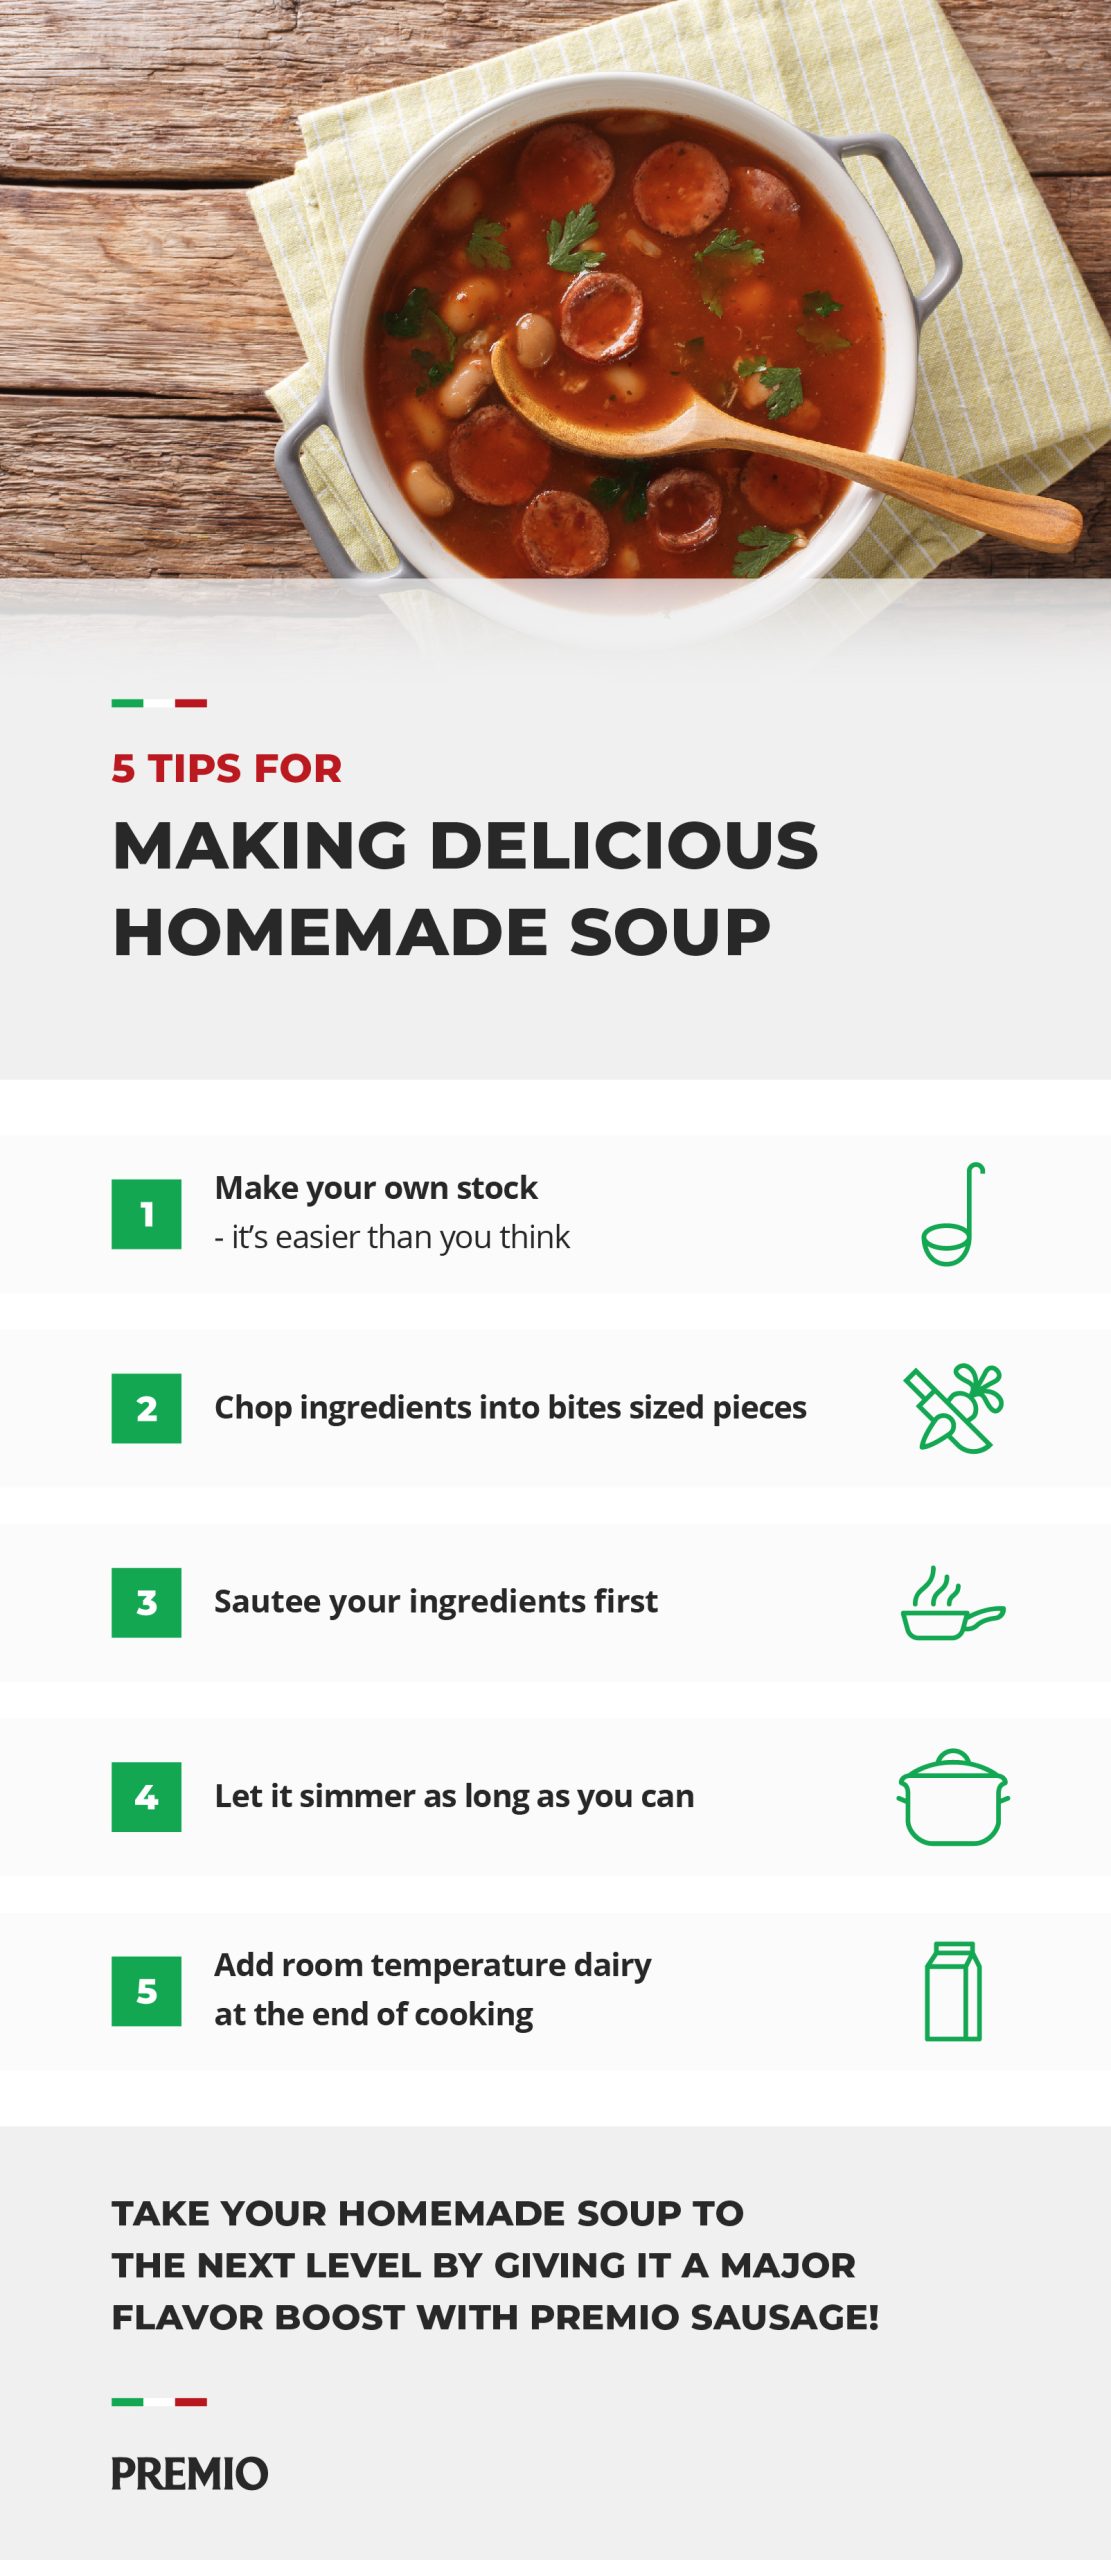 https://www.premiofoods.com/content/uploads/2021/04/MG-5-Tips-for-Making-Delicious-Homemade-Soup-scaled.jpg